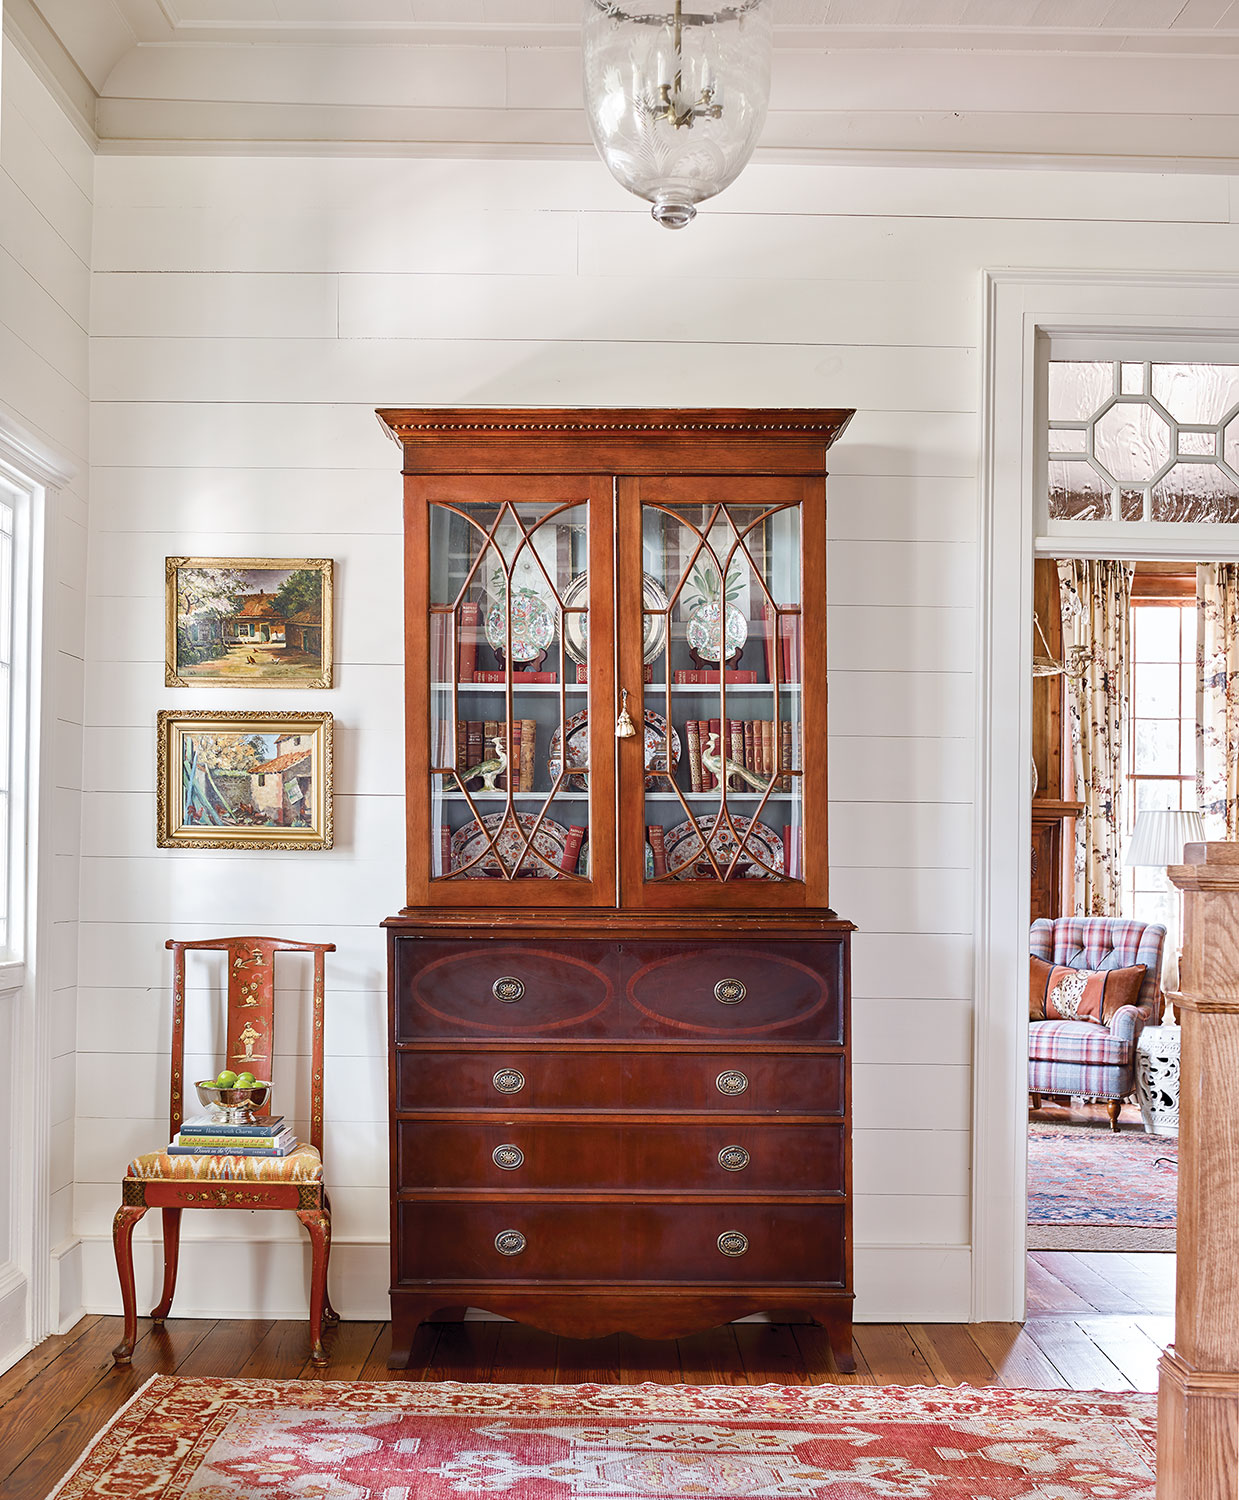 The fretwork design of the antique English secretary blends Edwardian, Queen Anne, and post-Victorian elements, making it a “stylistic mutt” that complements other pieces of varying provenances.